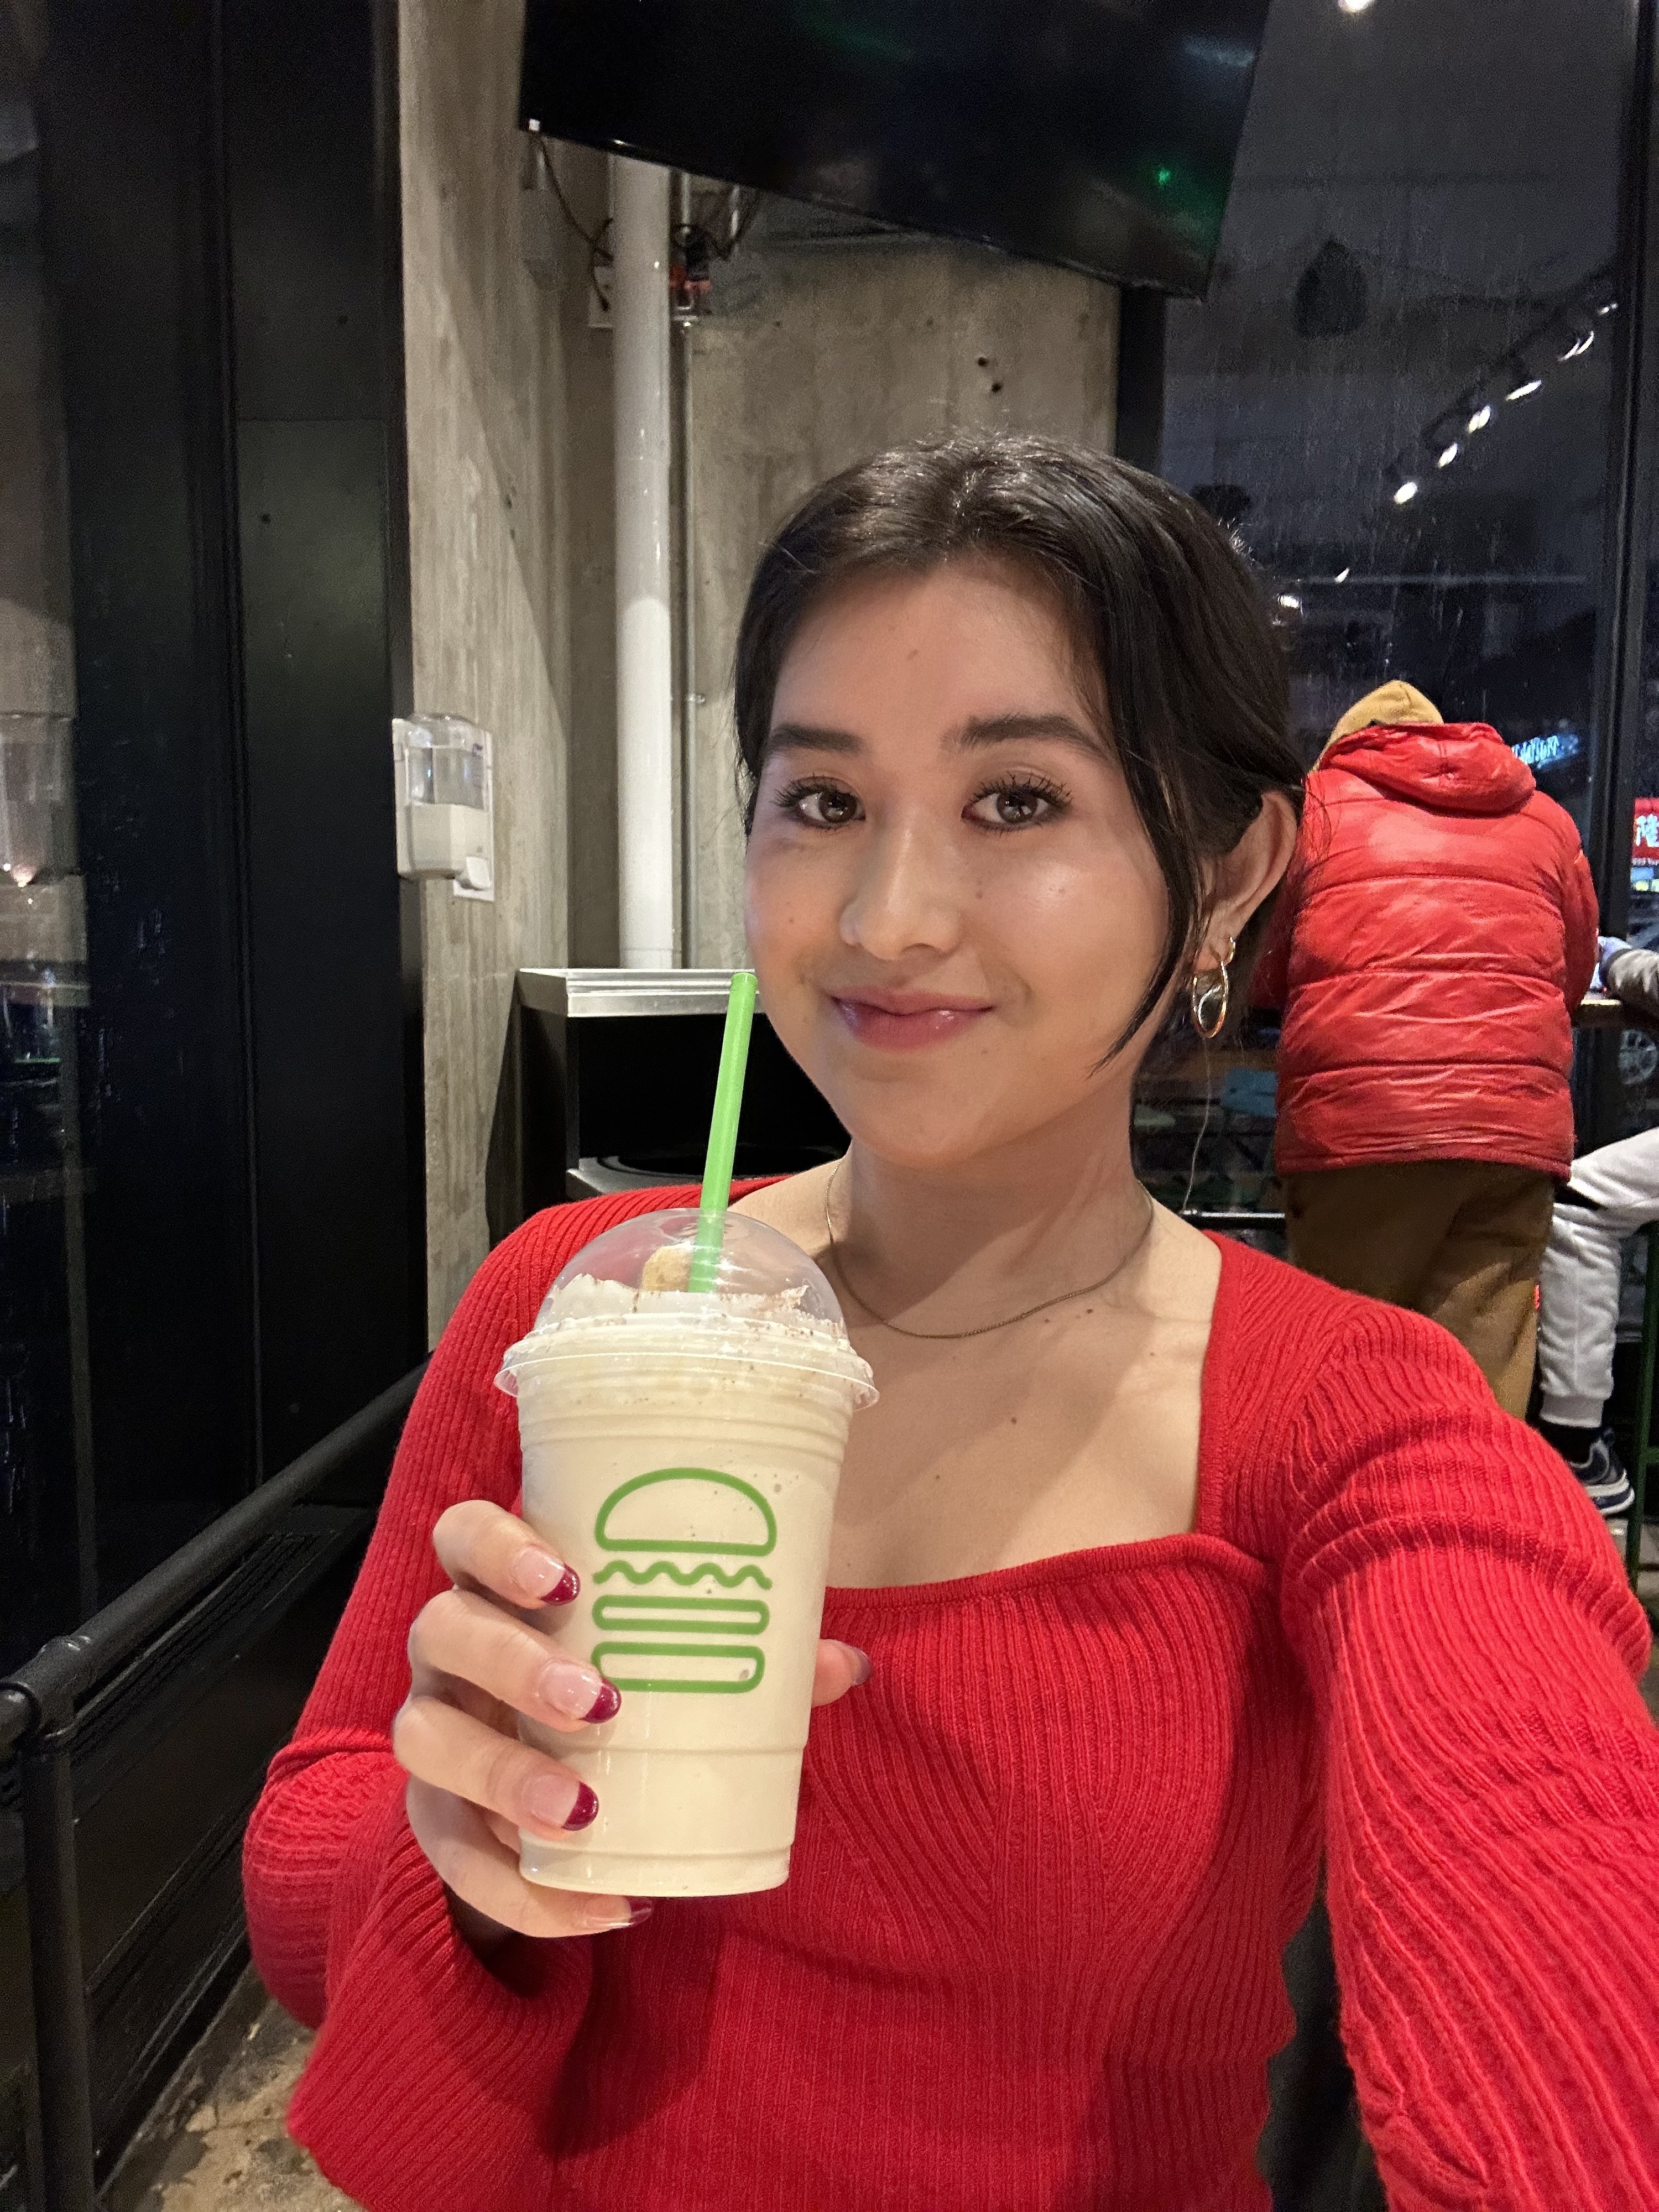 Woman holding the shake and smiling